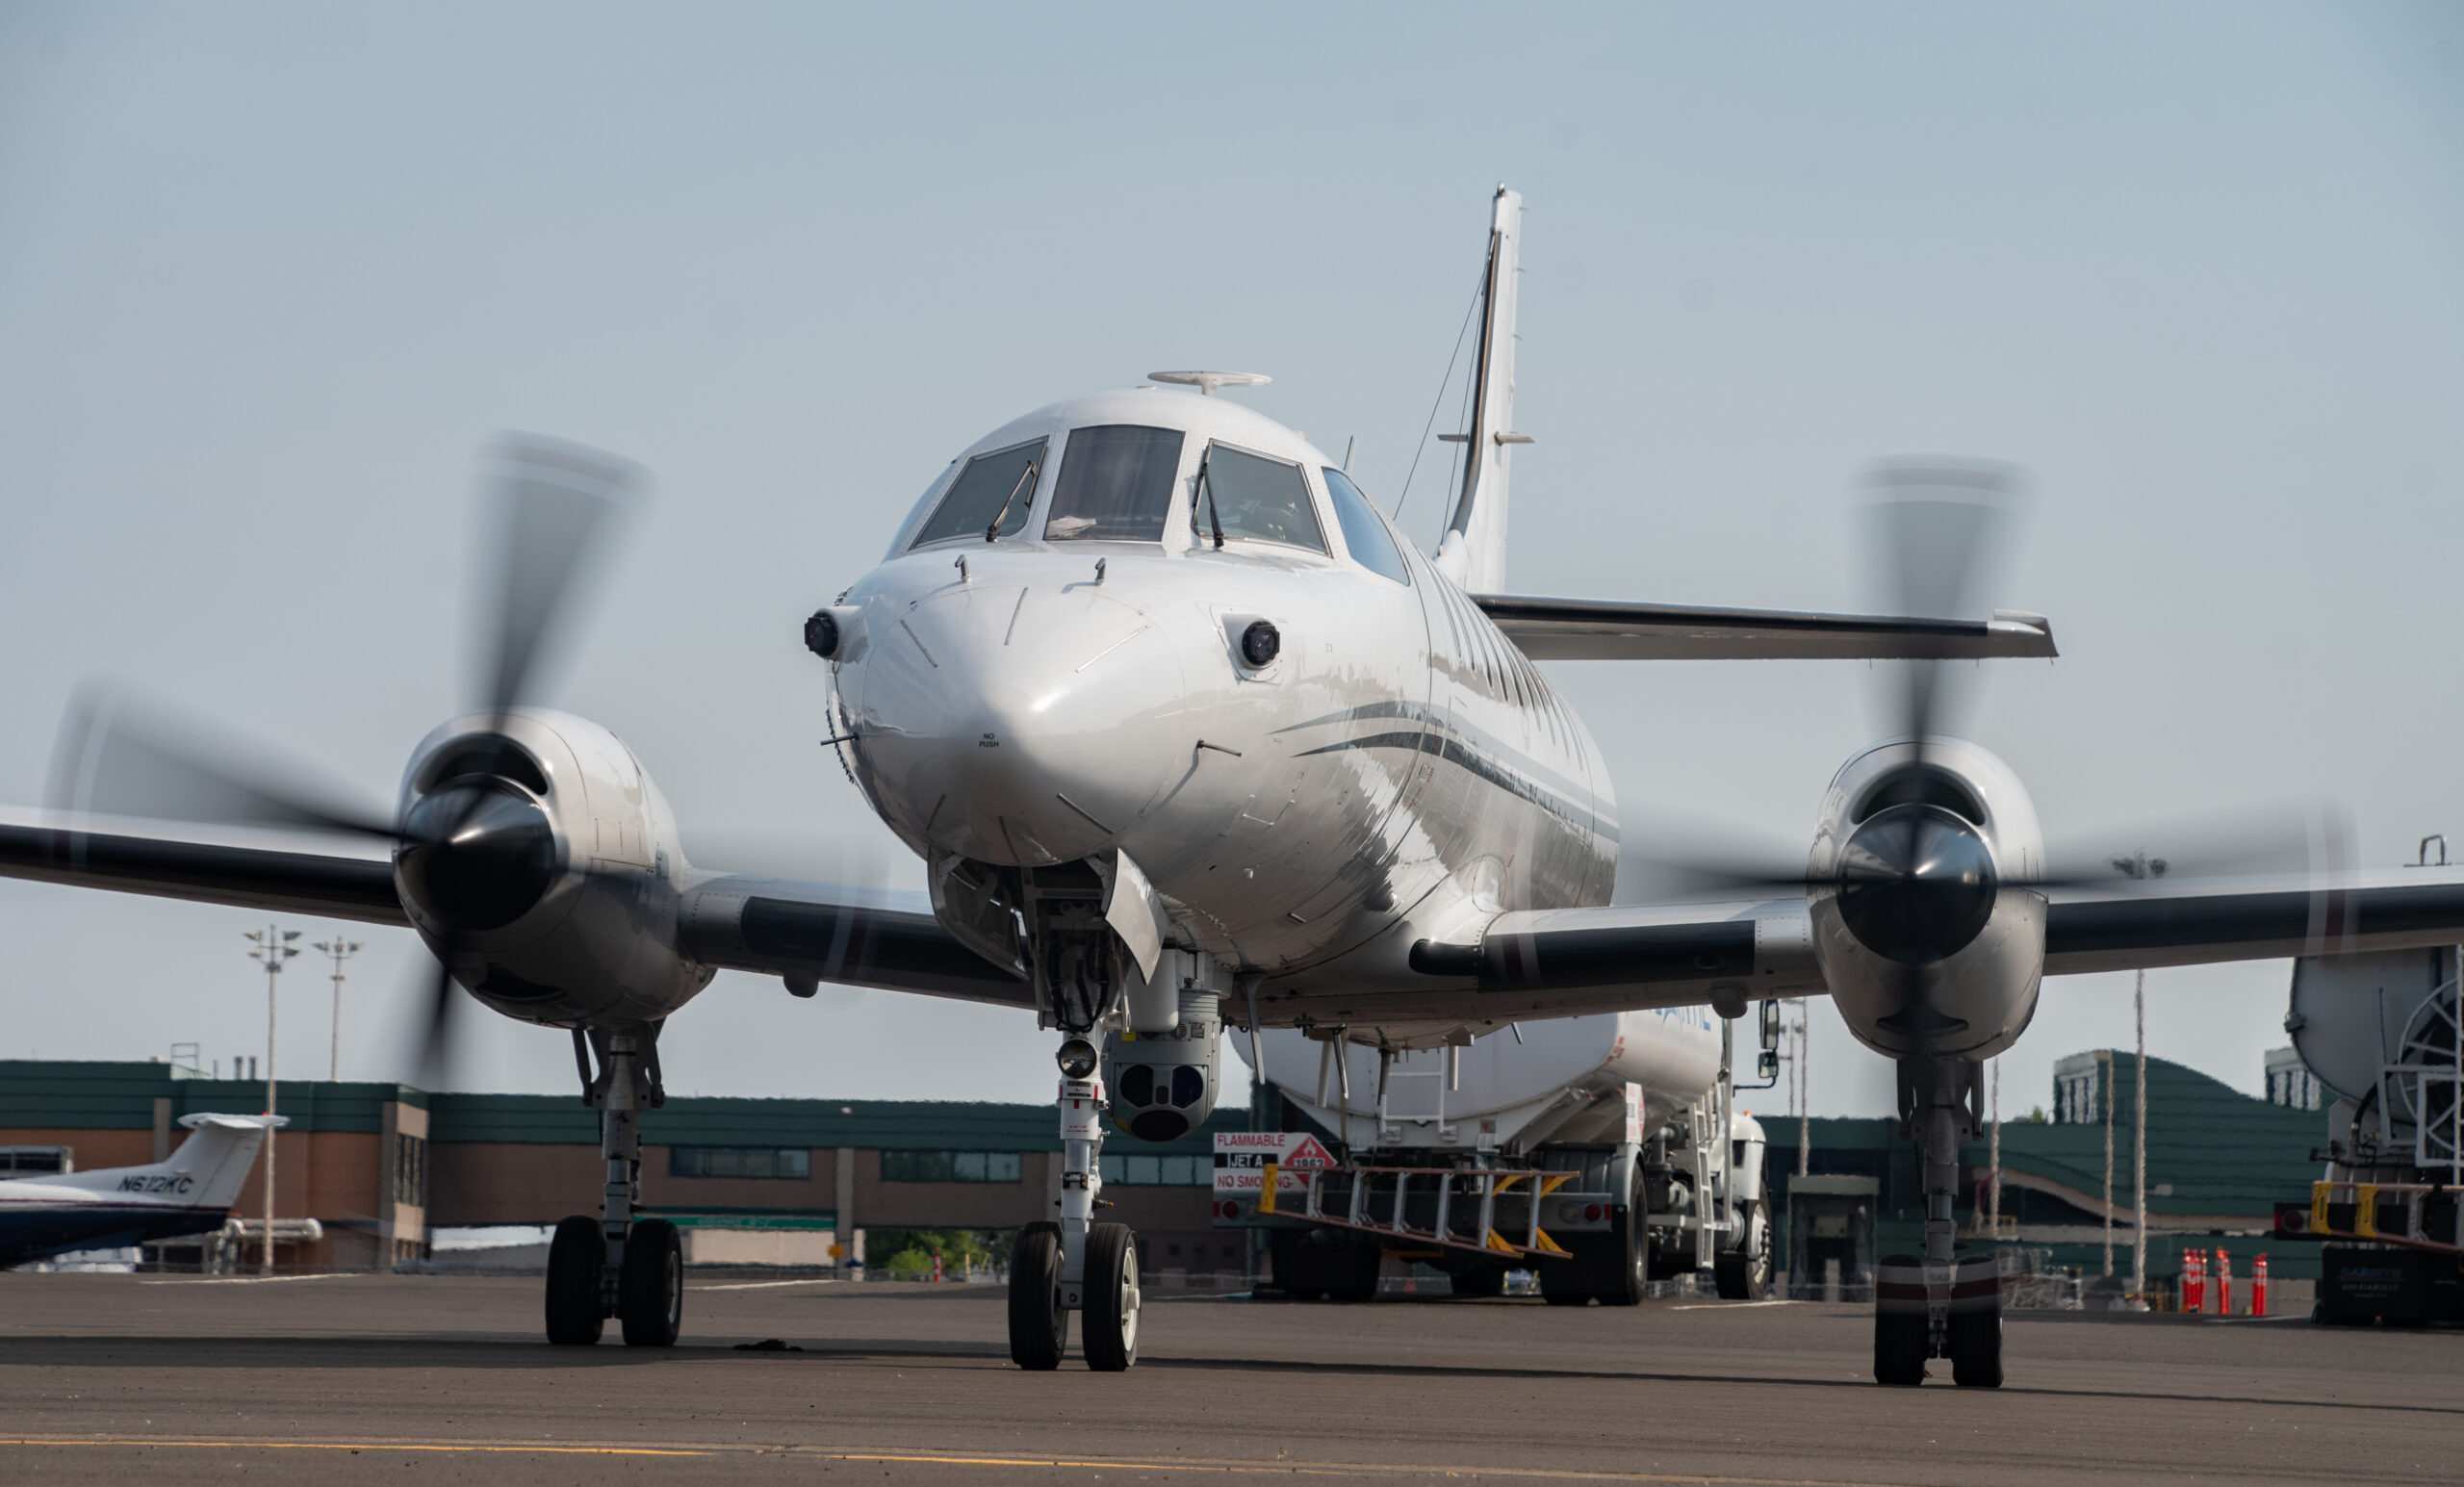 A U.S. Air Force RC-26B Metroliner aircraft assigned to the 162nd Fighter Wing, Arizona Air National Guard, sits on the flight line prior to departing on a wildland fire mapping and detection mission in support of the U.S. Forest Service at the Eugene Airport, Eugene, Ore., August 1, 2021. The RC-26 is tasked with utilizing its highly mobile platform by making infrared images and video of the fires from above in order to map and detect wildland fires and hotspots in the western region of the United States. The RC-26 crews can detect hotspots before they become fires and help direct teams to those locations. First Air Force (Air Forces Northern), U.S. Northern Command’s Air Component, is the DoD’s operational lead for the aerial military wildland fire fighting response. (U.S. Air National Guard photo by Airman 1st Class Thomas Cox)